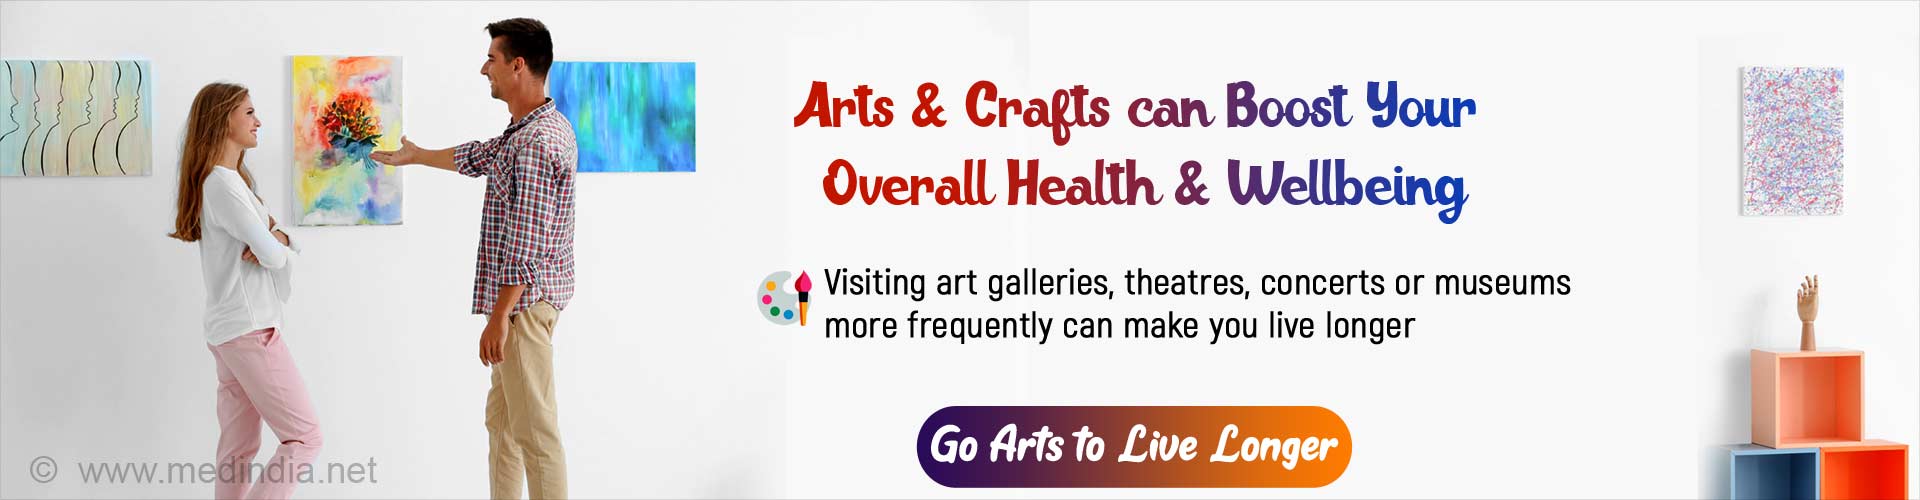 Arts & Crafts can Boost Your Overall Health & Well-being. Visiting art galleries, theaters, concerts or museum more frequently can make you live longer. Go Arts to Live Longer 